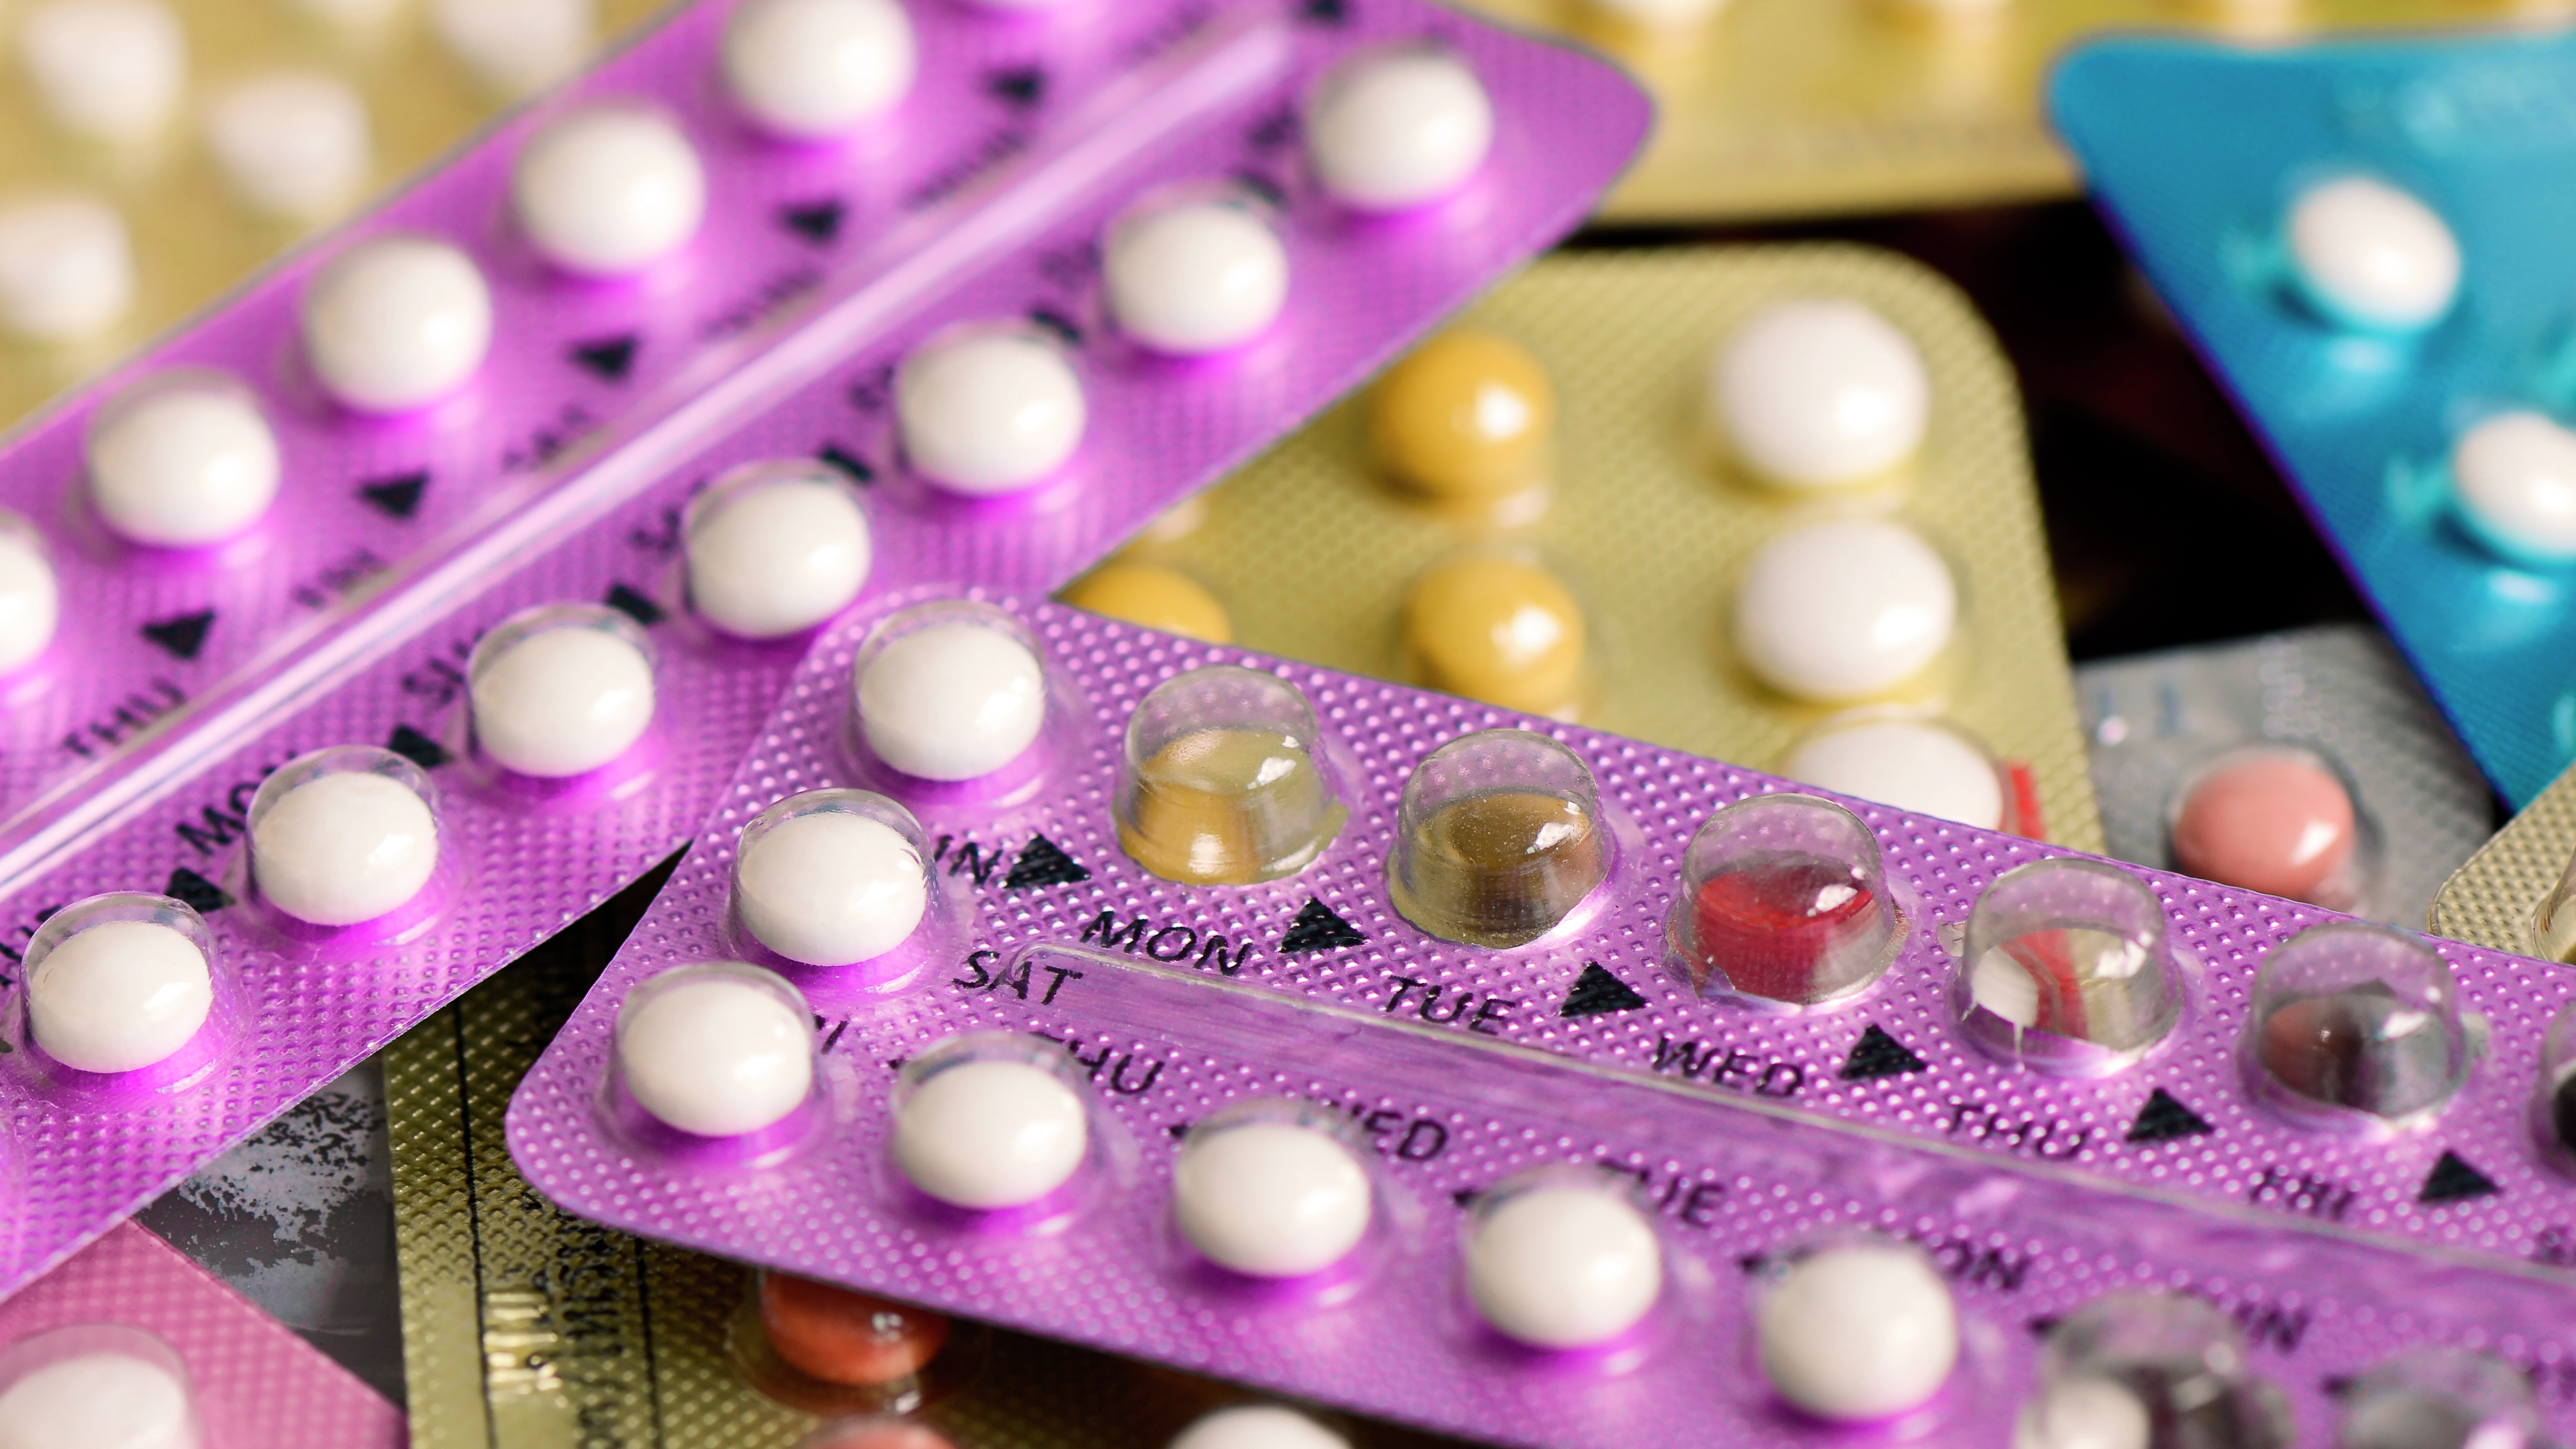 New order allows New Jersey pharmacies to carry hormonal contraceptives over the counter